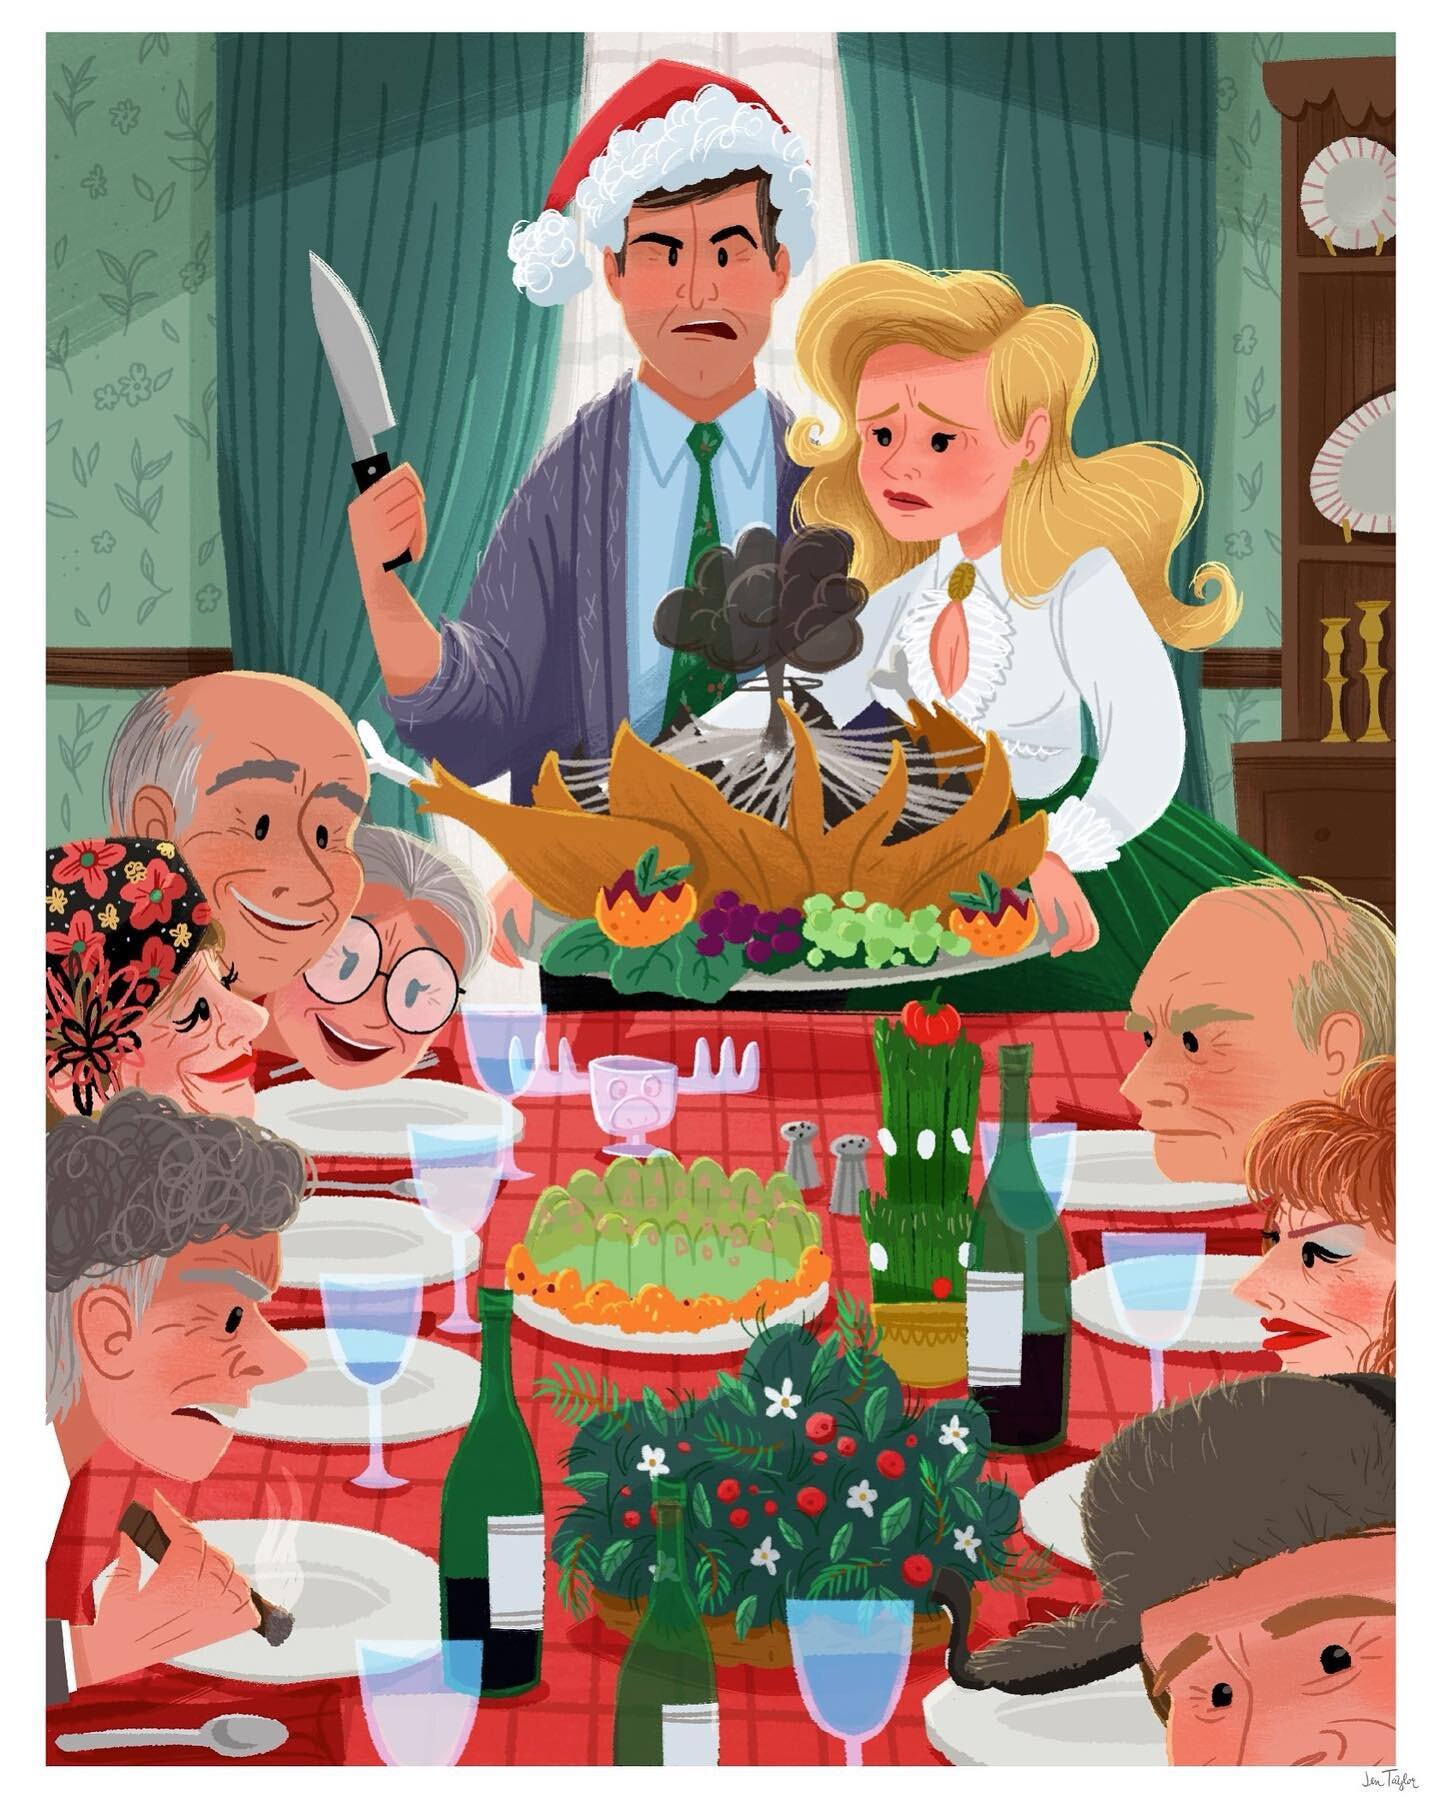 Nothing like the chaos of the holidays!
Here&rsquo;s a piece I did for @galleries1988 Holiday Show 2 years ago! (Sold out) 
.
.
.
#christmasvacation #christmasvacationmovie #clarkgriswold @chevychase #ellengriswold #cousineddie #thegriswolds #christm